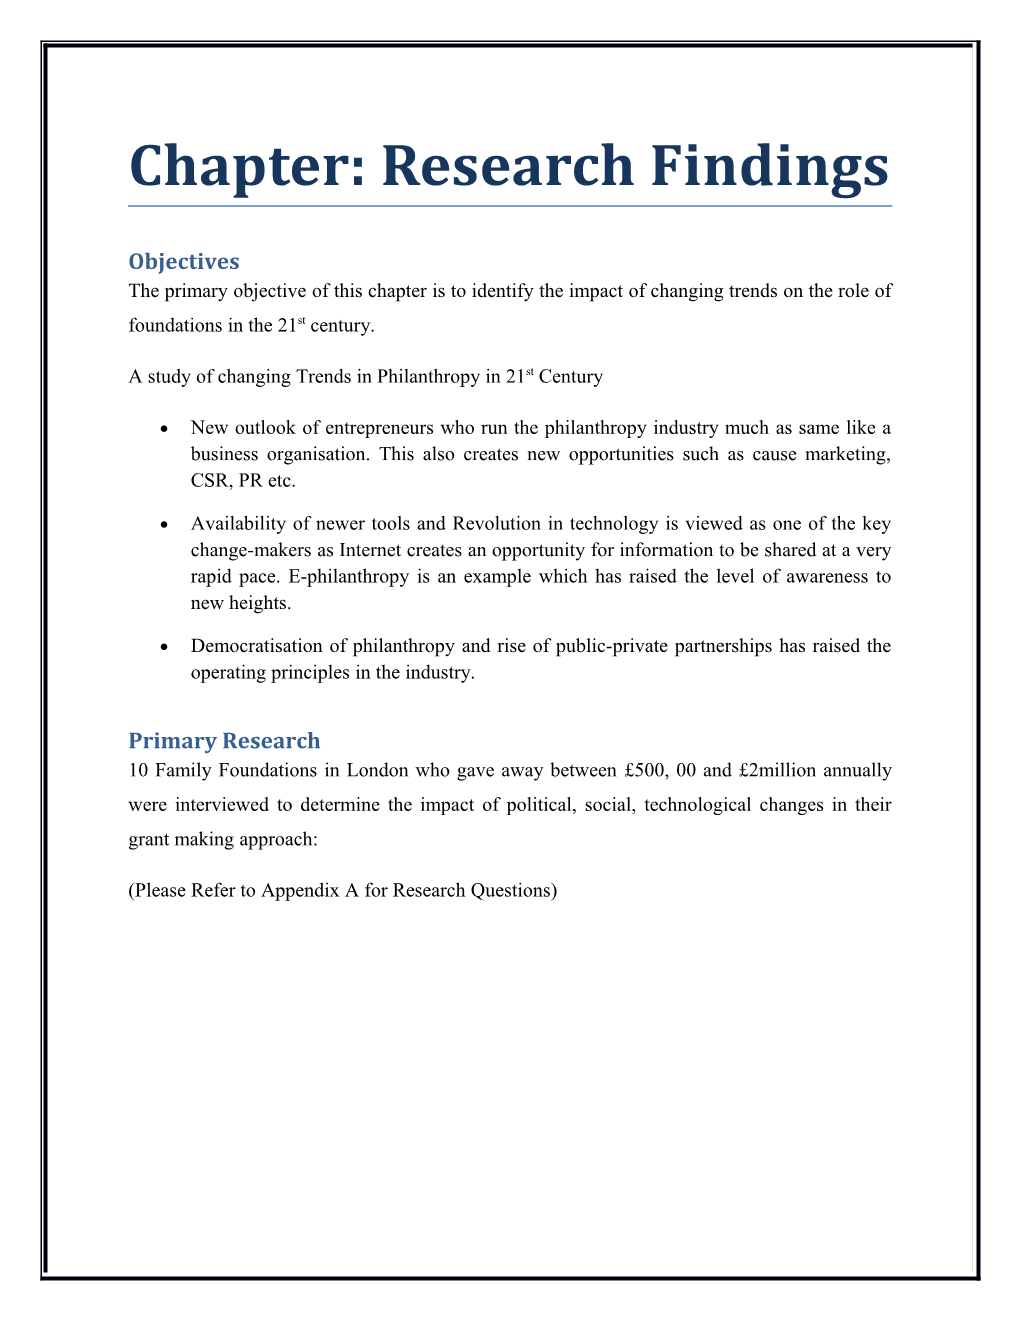 Chapter: Research Findings